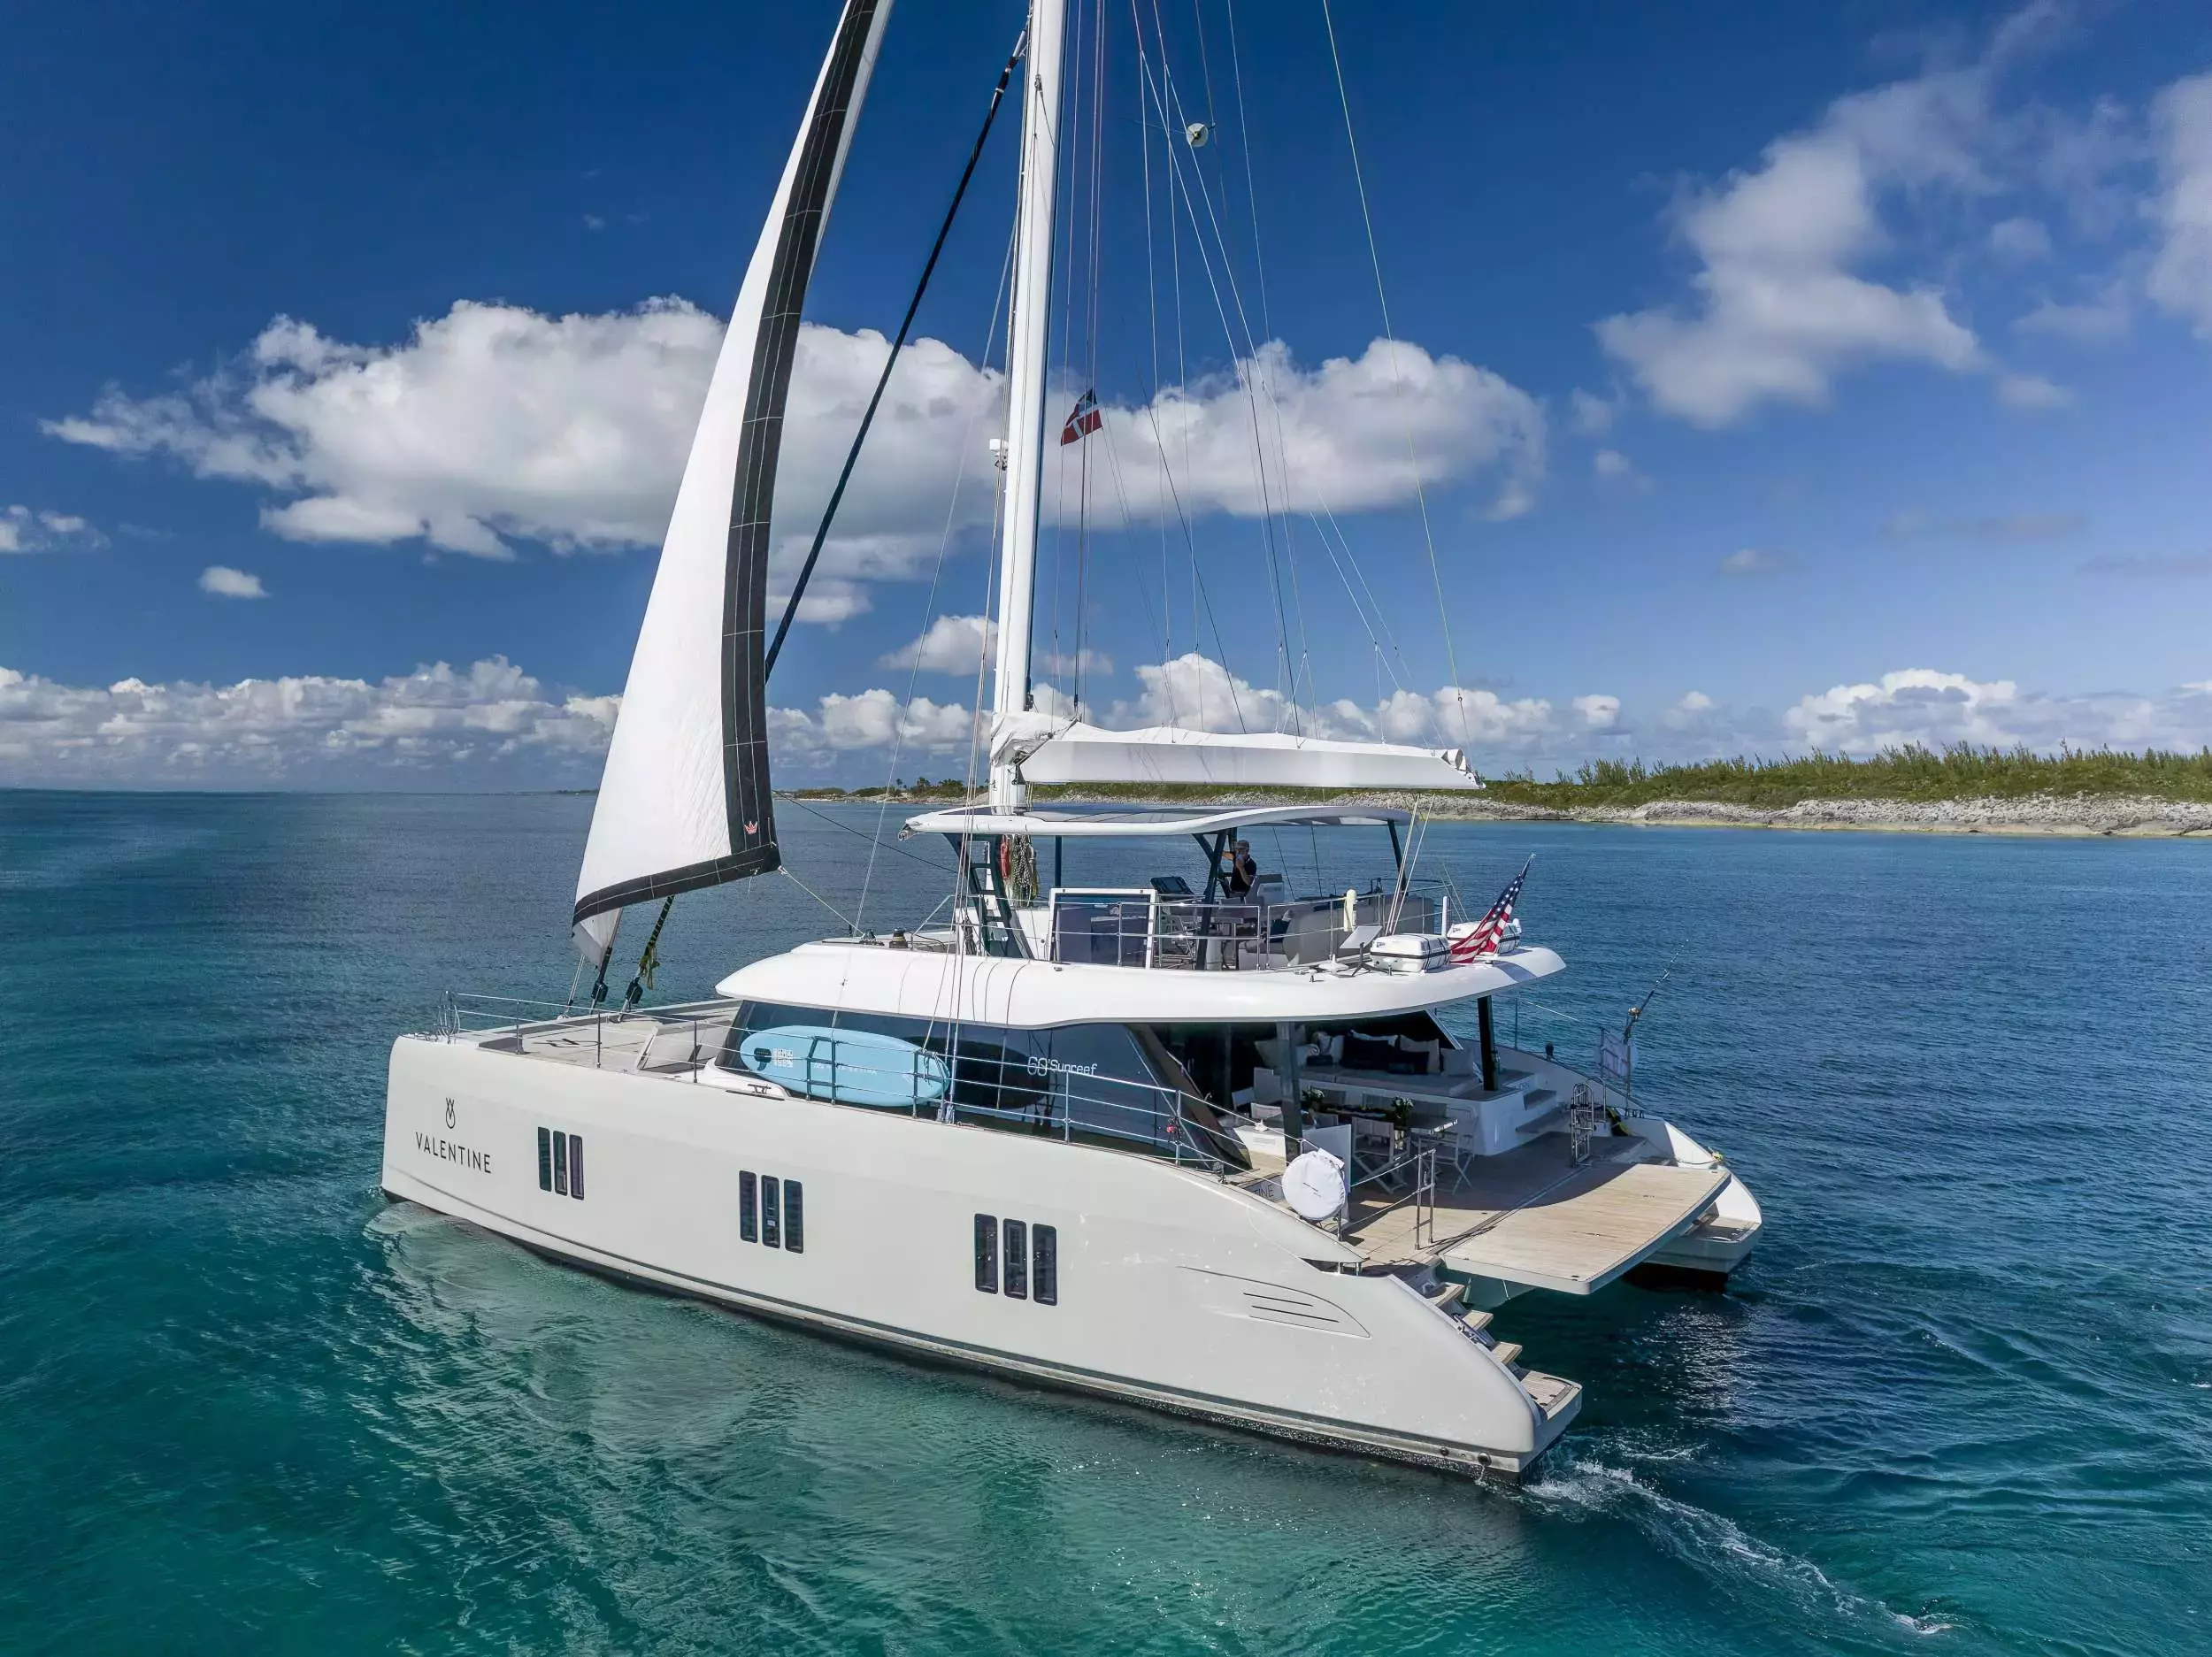 Valentine by Sunreef Yachts - Special Offer for a private Power Catamaran Rental in St Thomas with a crew